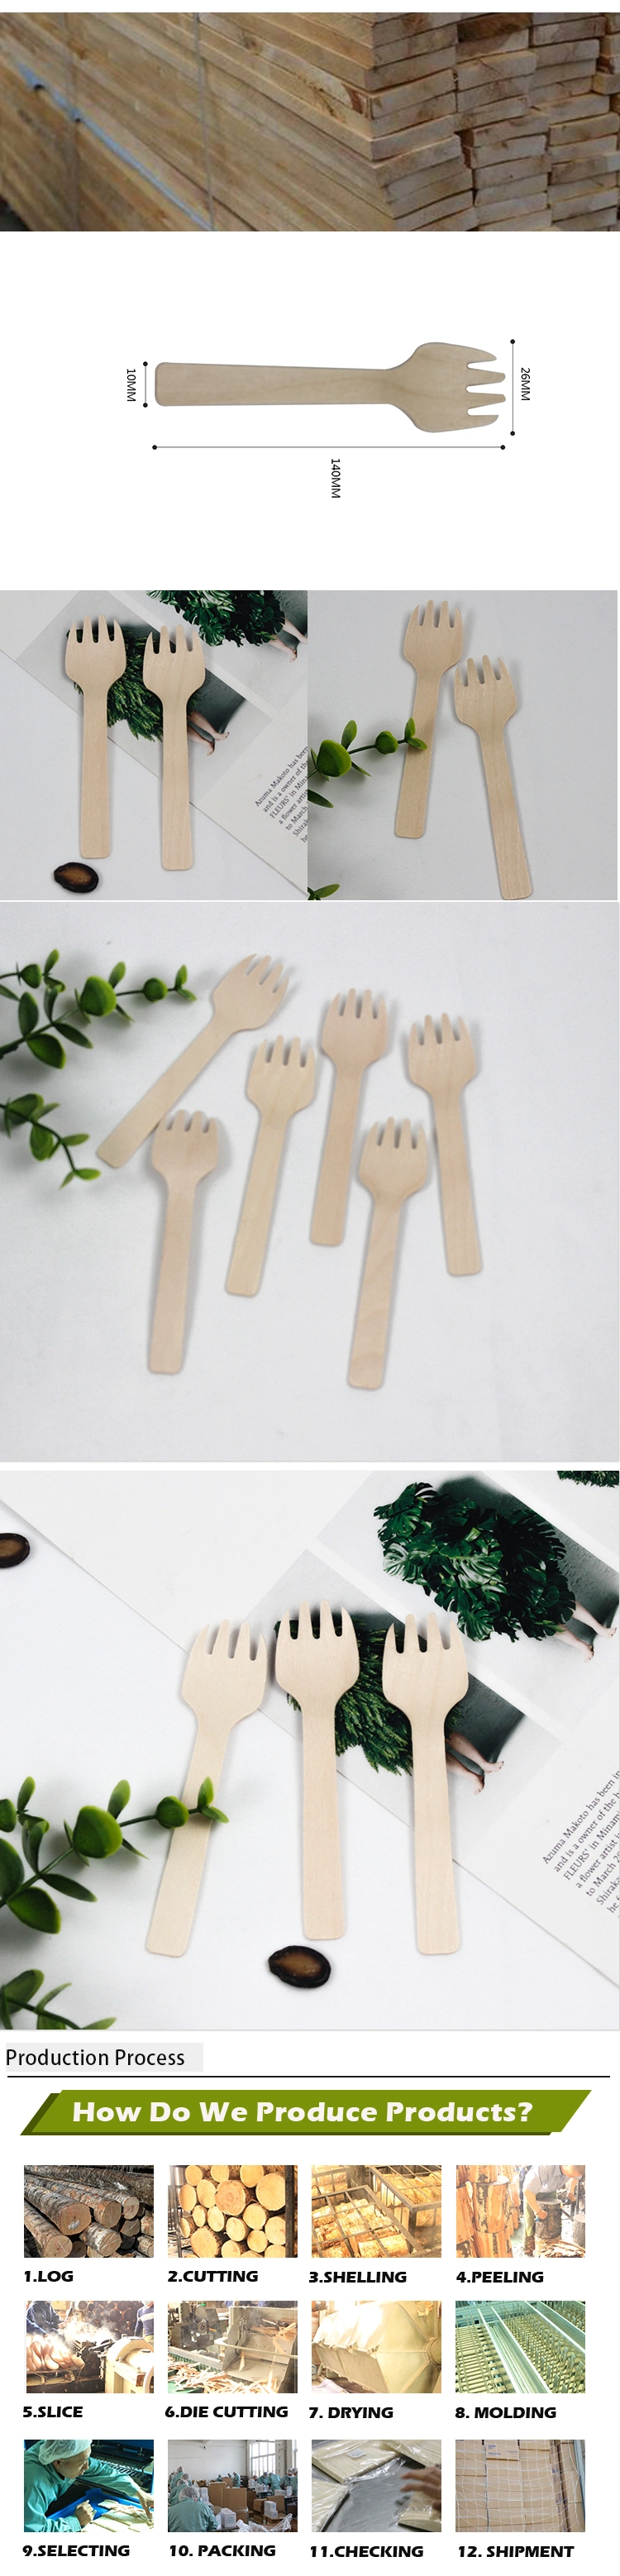 China Manufacturer 100% Natural Compostable Eco Bamboo Cutlery Sporks 104mm Disposable/Biodegradable Bamboo Spork